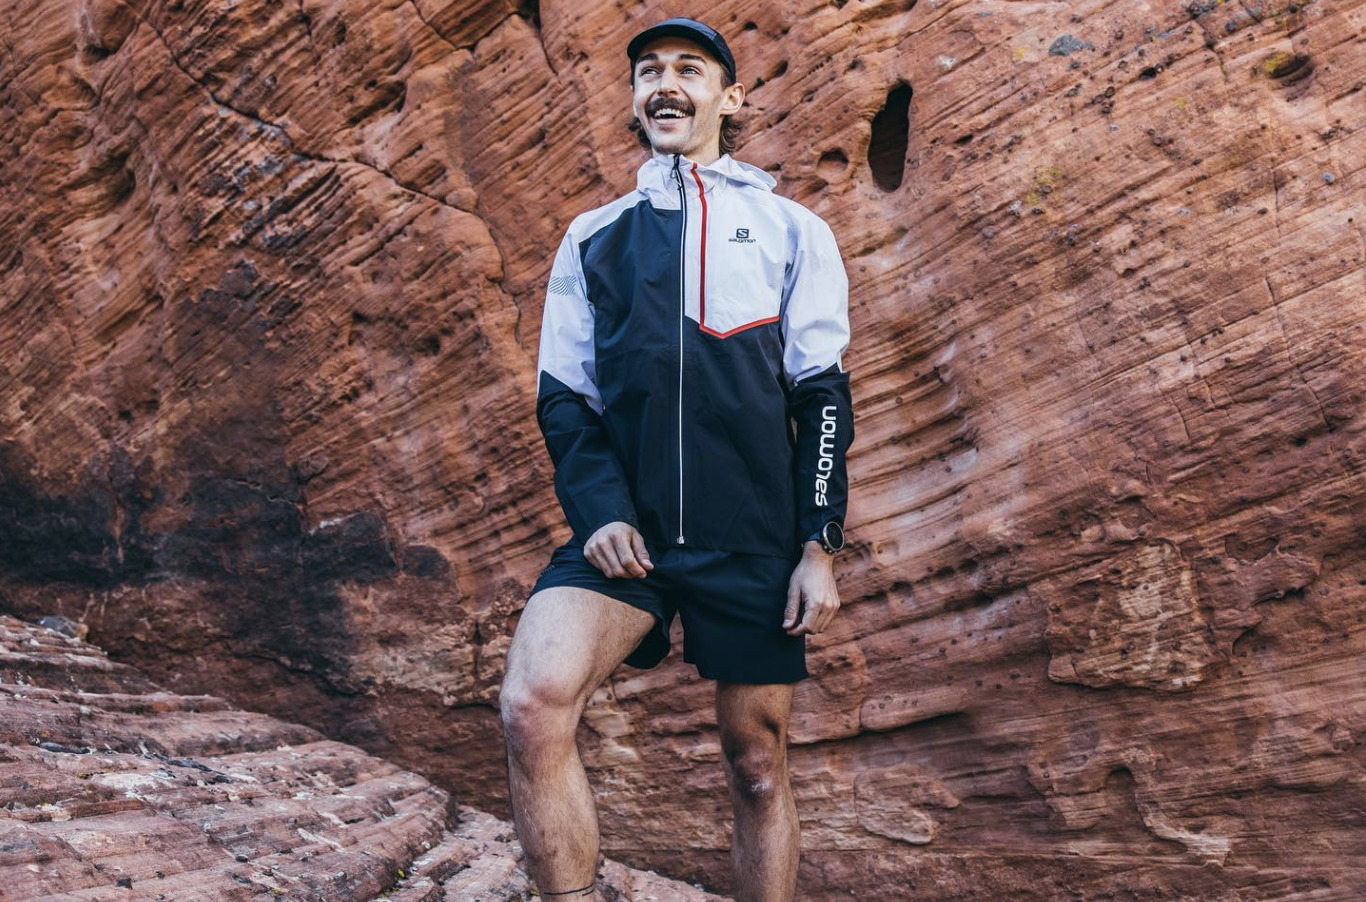 On the Off The Couch podcast, Our running editor, Matt Mitchell, sat down with Salomon athlete Logan Williams to discuss his recent top 10 finish at the Black Canyon 100K. This top-10 finish happened after Logan ruptured his achilles last year at Black Canyon, so Logan talks about what returning to the scene of the crime meant for him; his relationship with injury; how he’s recovering from racing 62 miles through the desert; his thoughts on running as an artform, and a whole lot more.